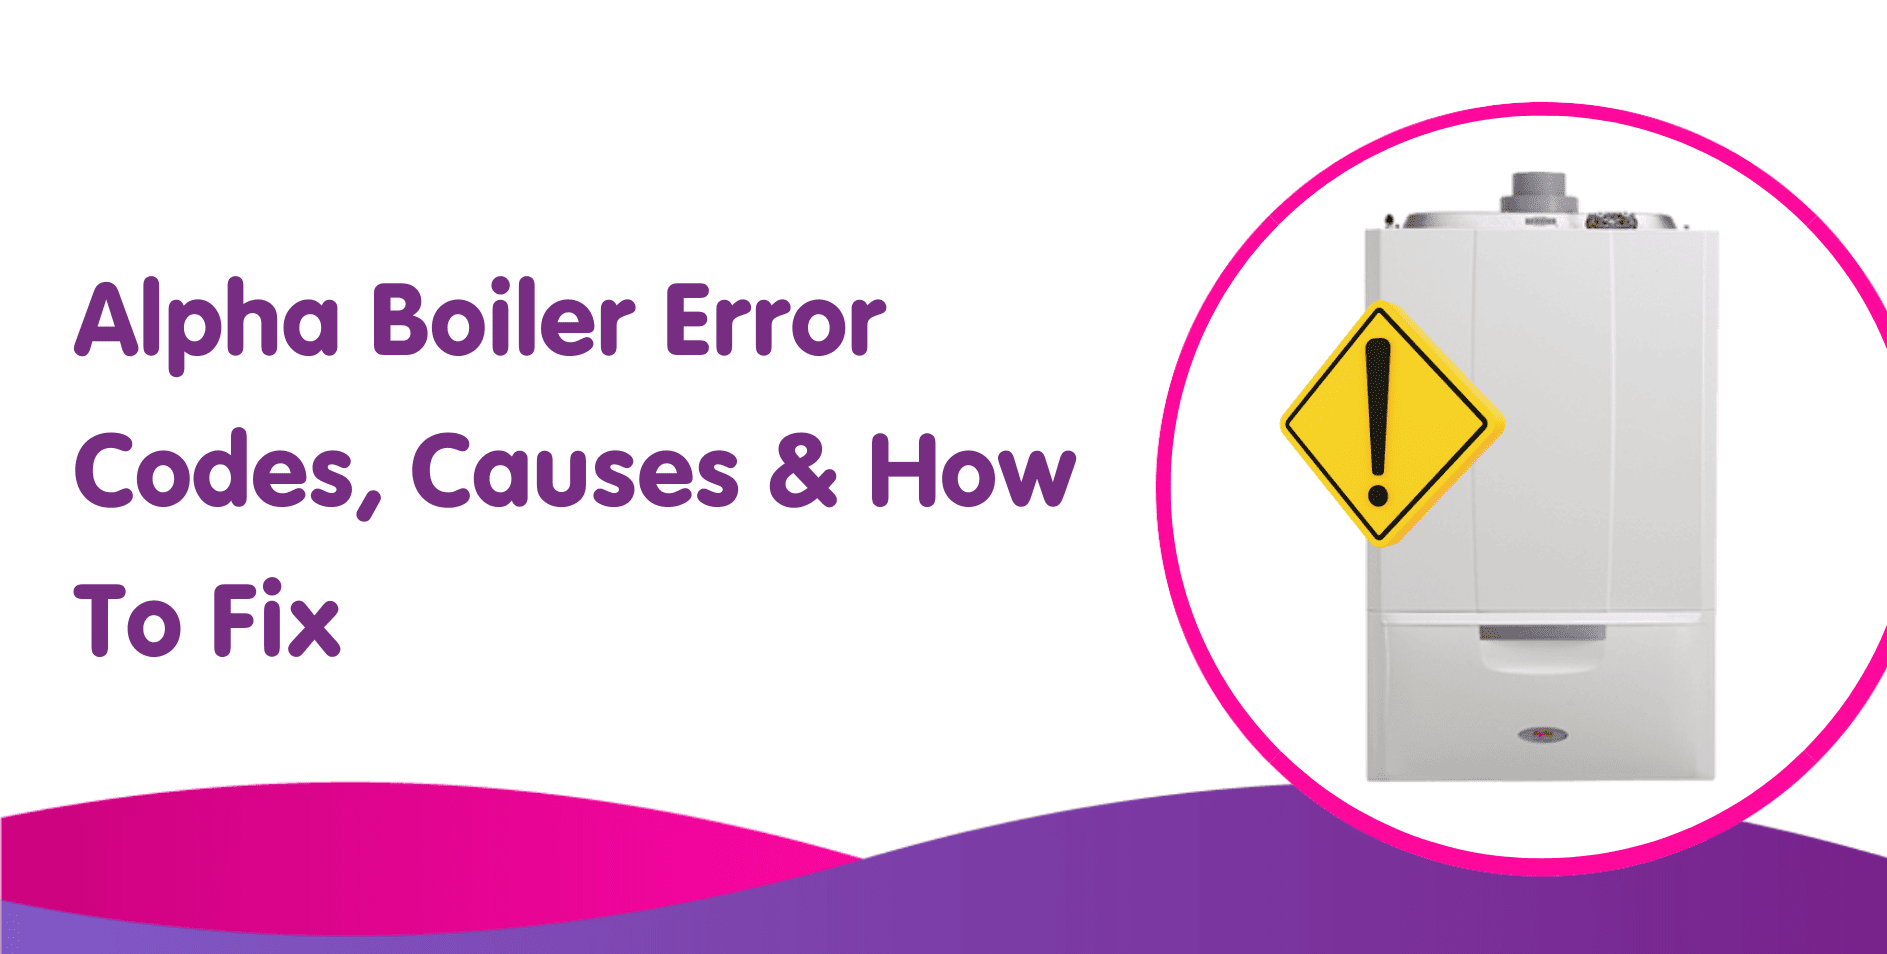 Alpha Boiler Error Codes, Causes & How To Fix